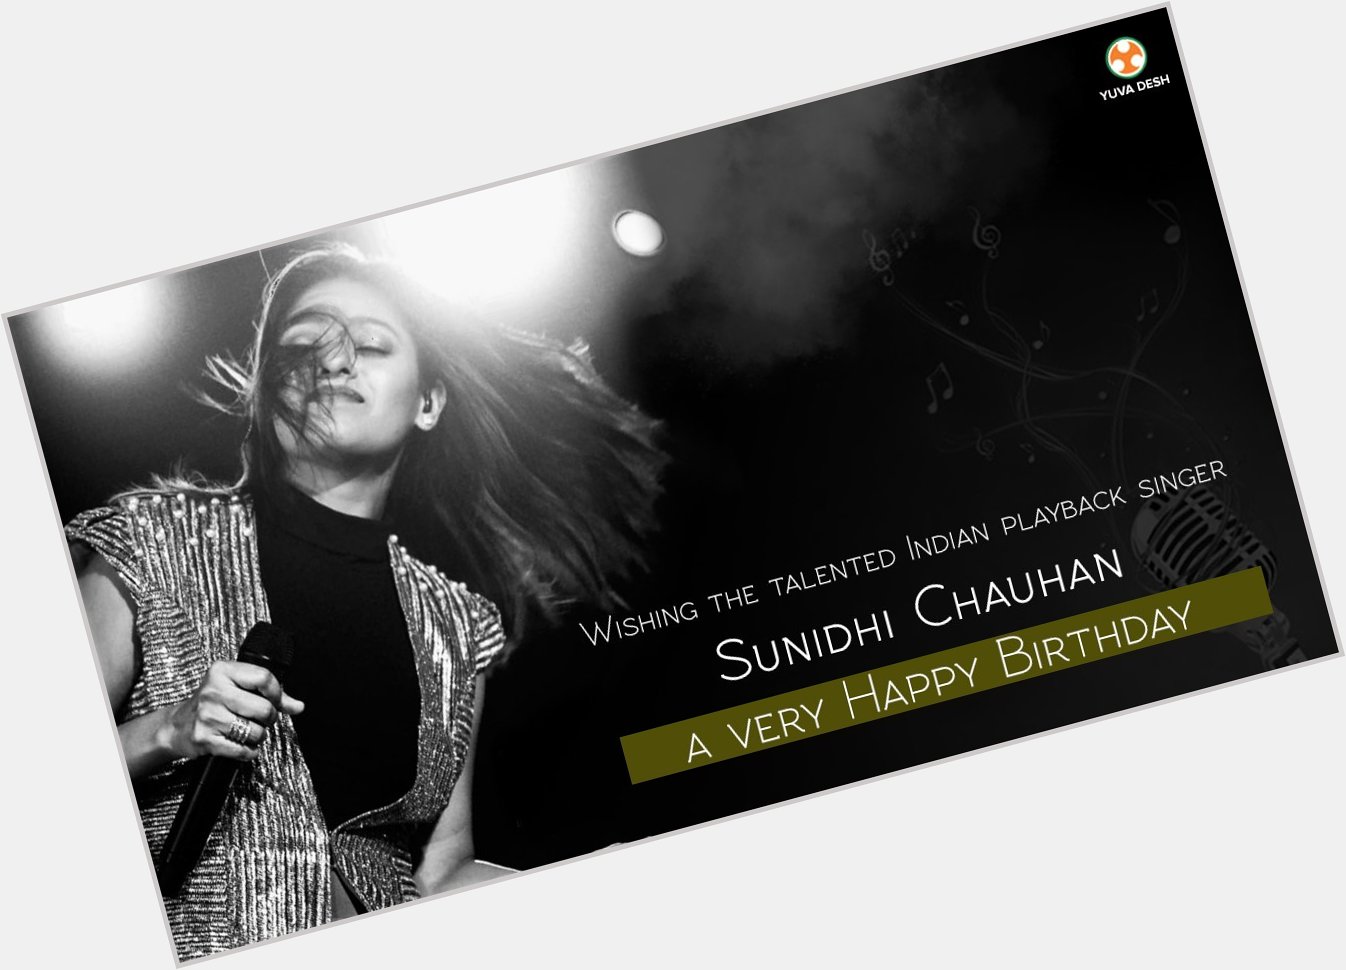 YuvaDesh wishes the talented singer, Sunidhi Chauhan, a very happy birthday.  